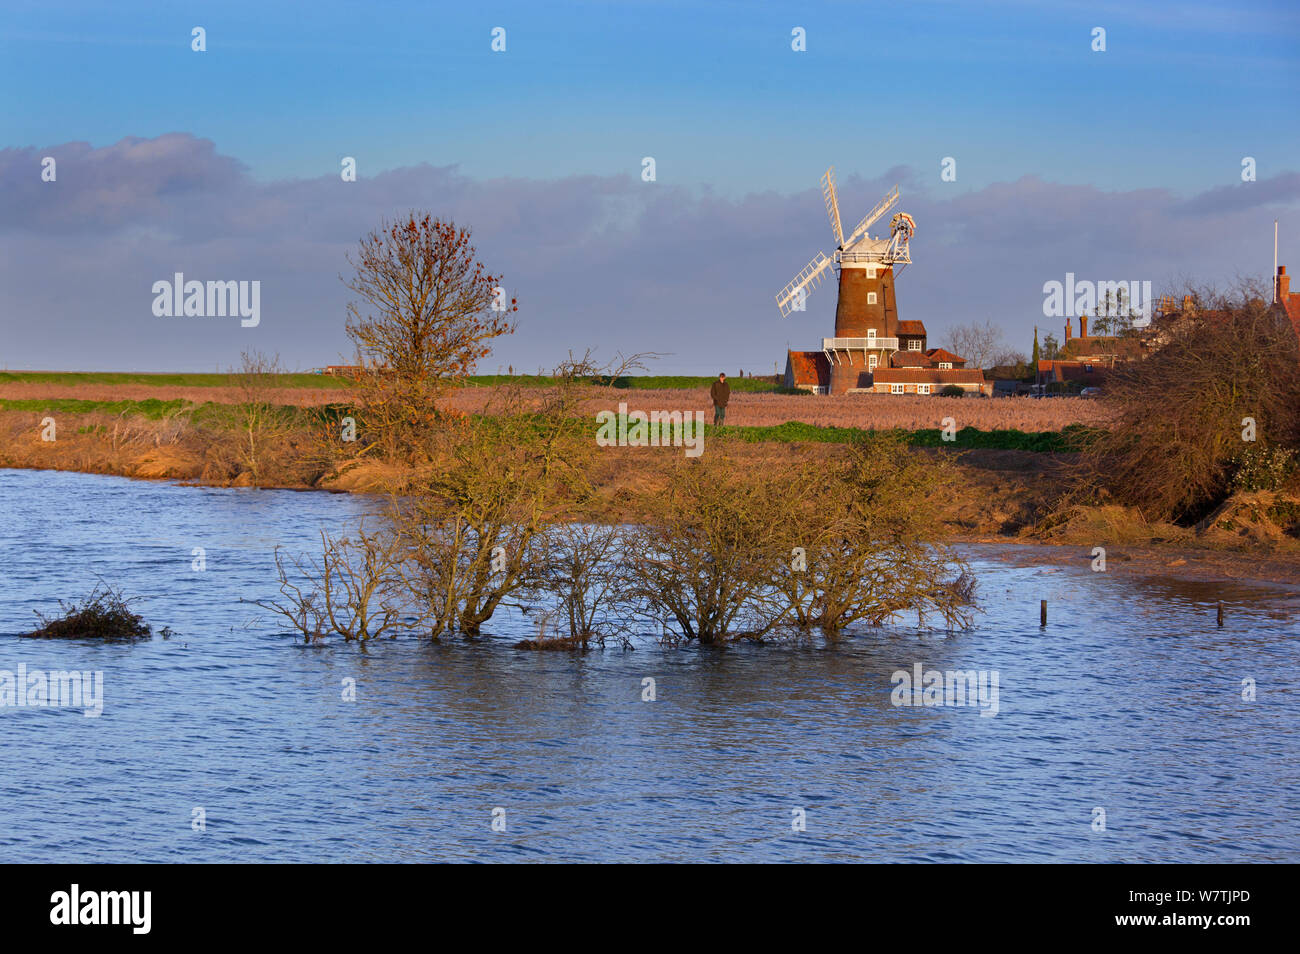 View of flooding after the 6th December east coast tidal surge, with Cley windmill and village in the background, Norfolk, England, UK, December 2013. Stock Photo